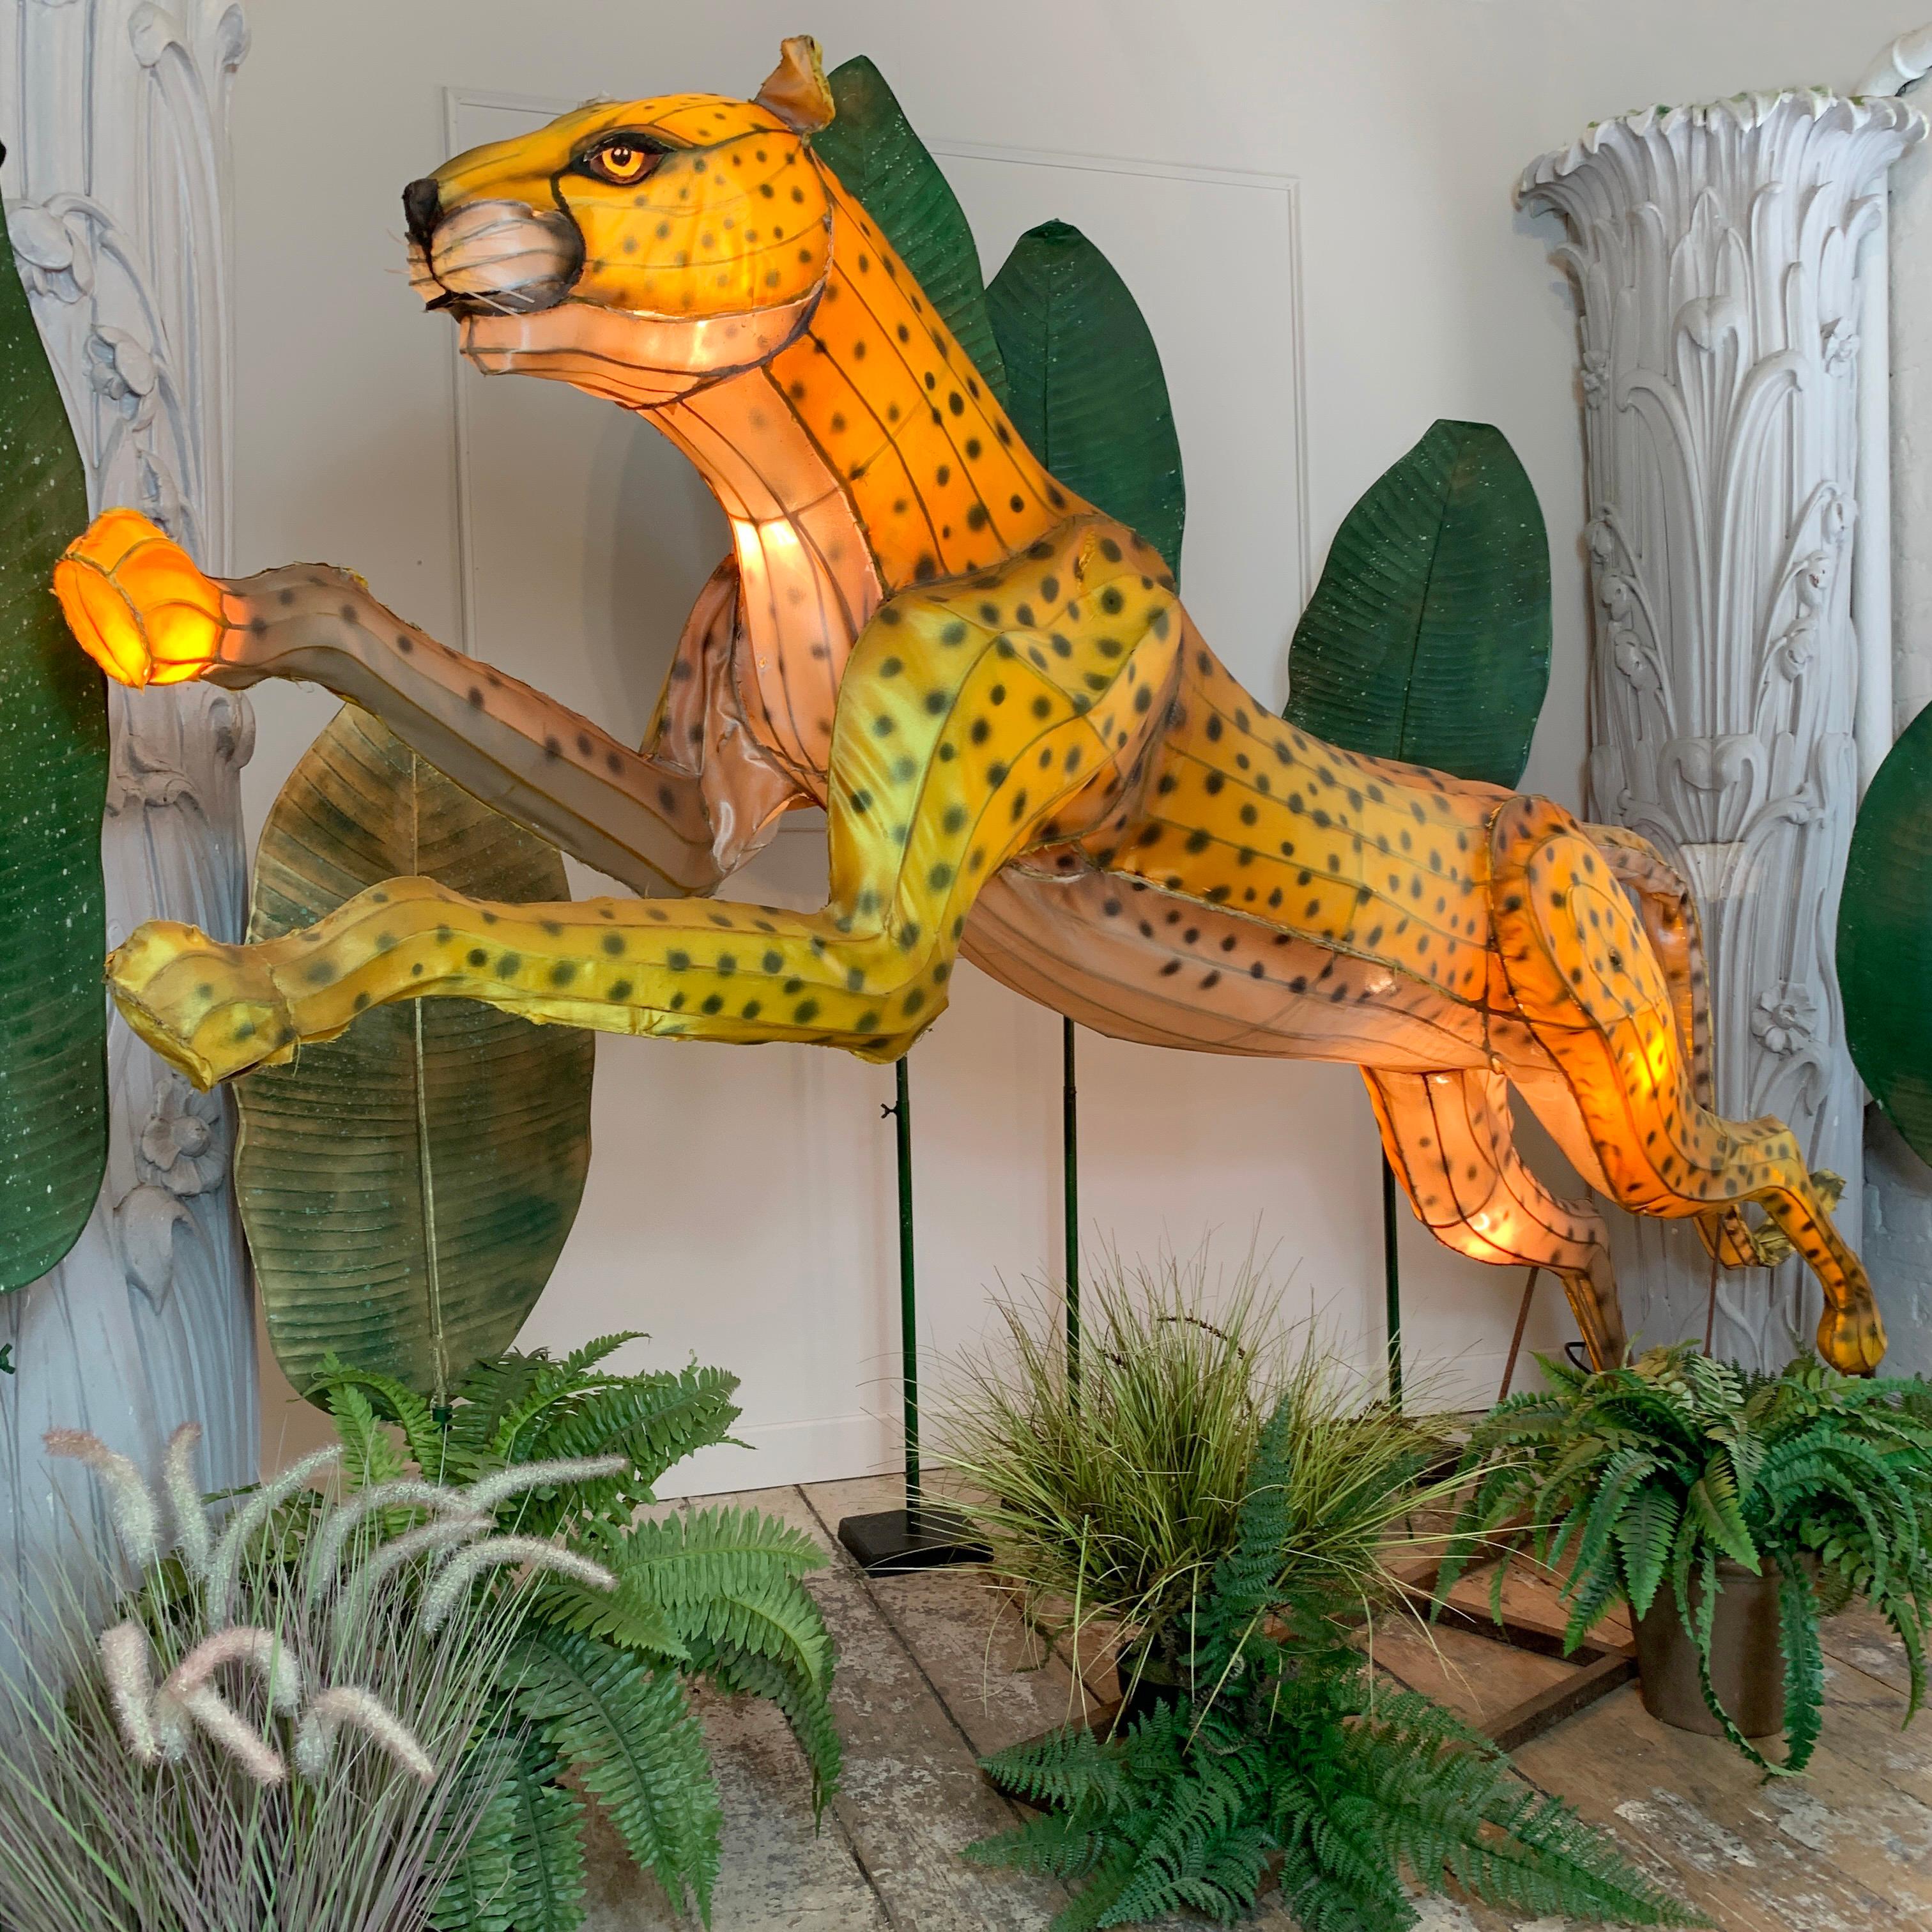 This huge illuminated cheetah is a rare and unique piece
Originally made for London Zoo, Whipsnade Zoo & Chester Zoo as part of a travelling group of giant animal lanterns for special evening zoo openings called 'Zoo nights'. Set among towering